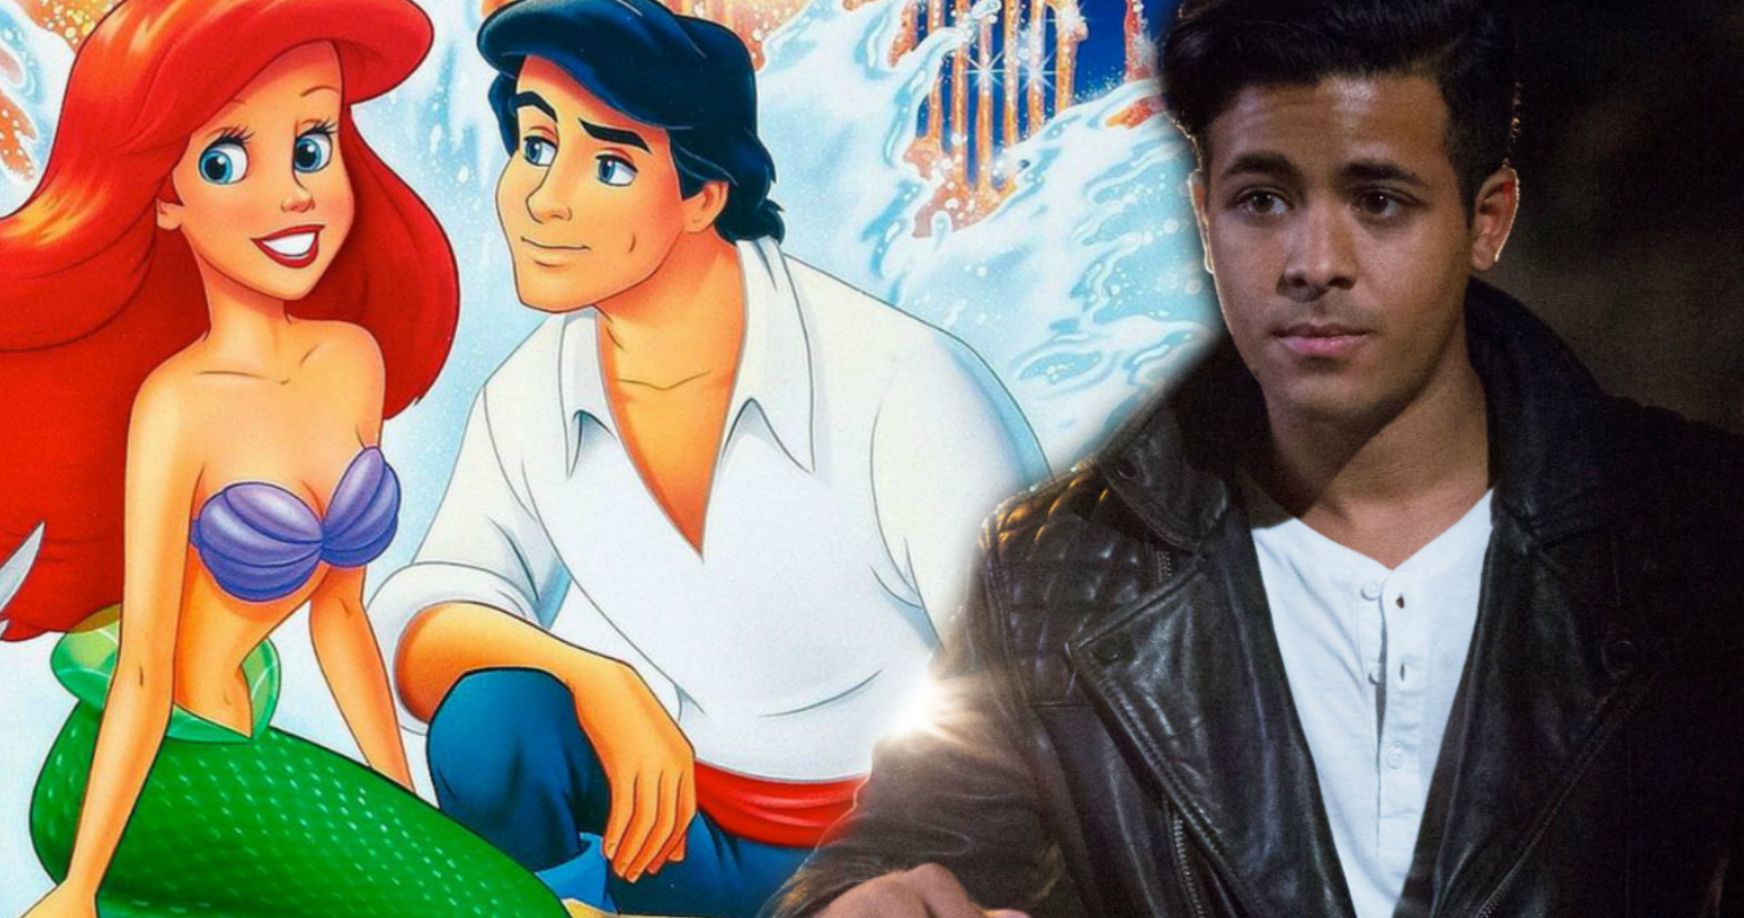 Disney's Little Mermaid Remake Auditions 13 Reasons Why Star for Prince